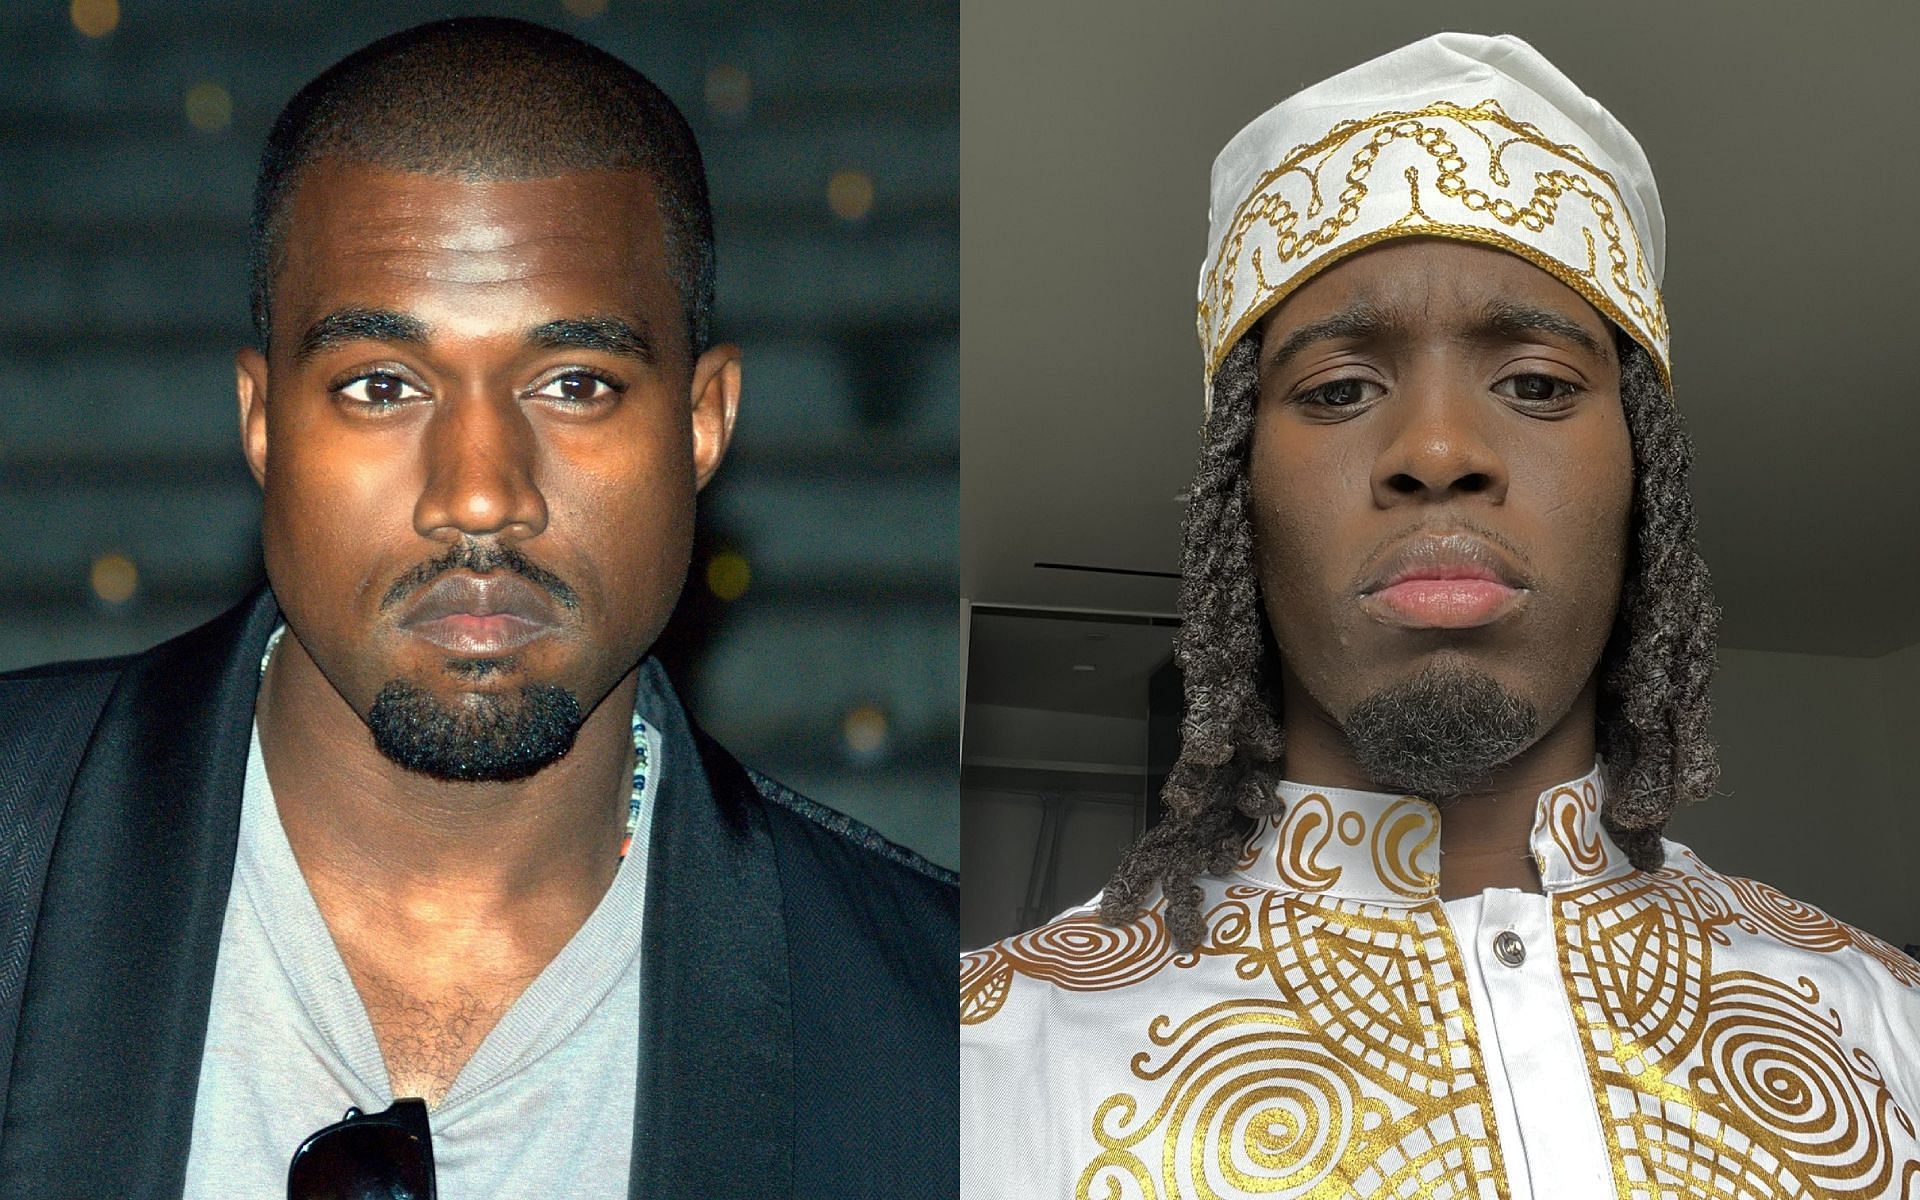 Kai Cenat hits back at Kanye West for his recent comments about him